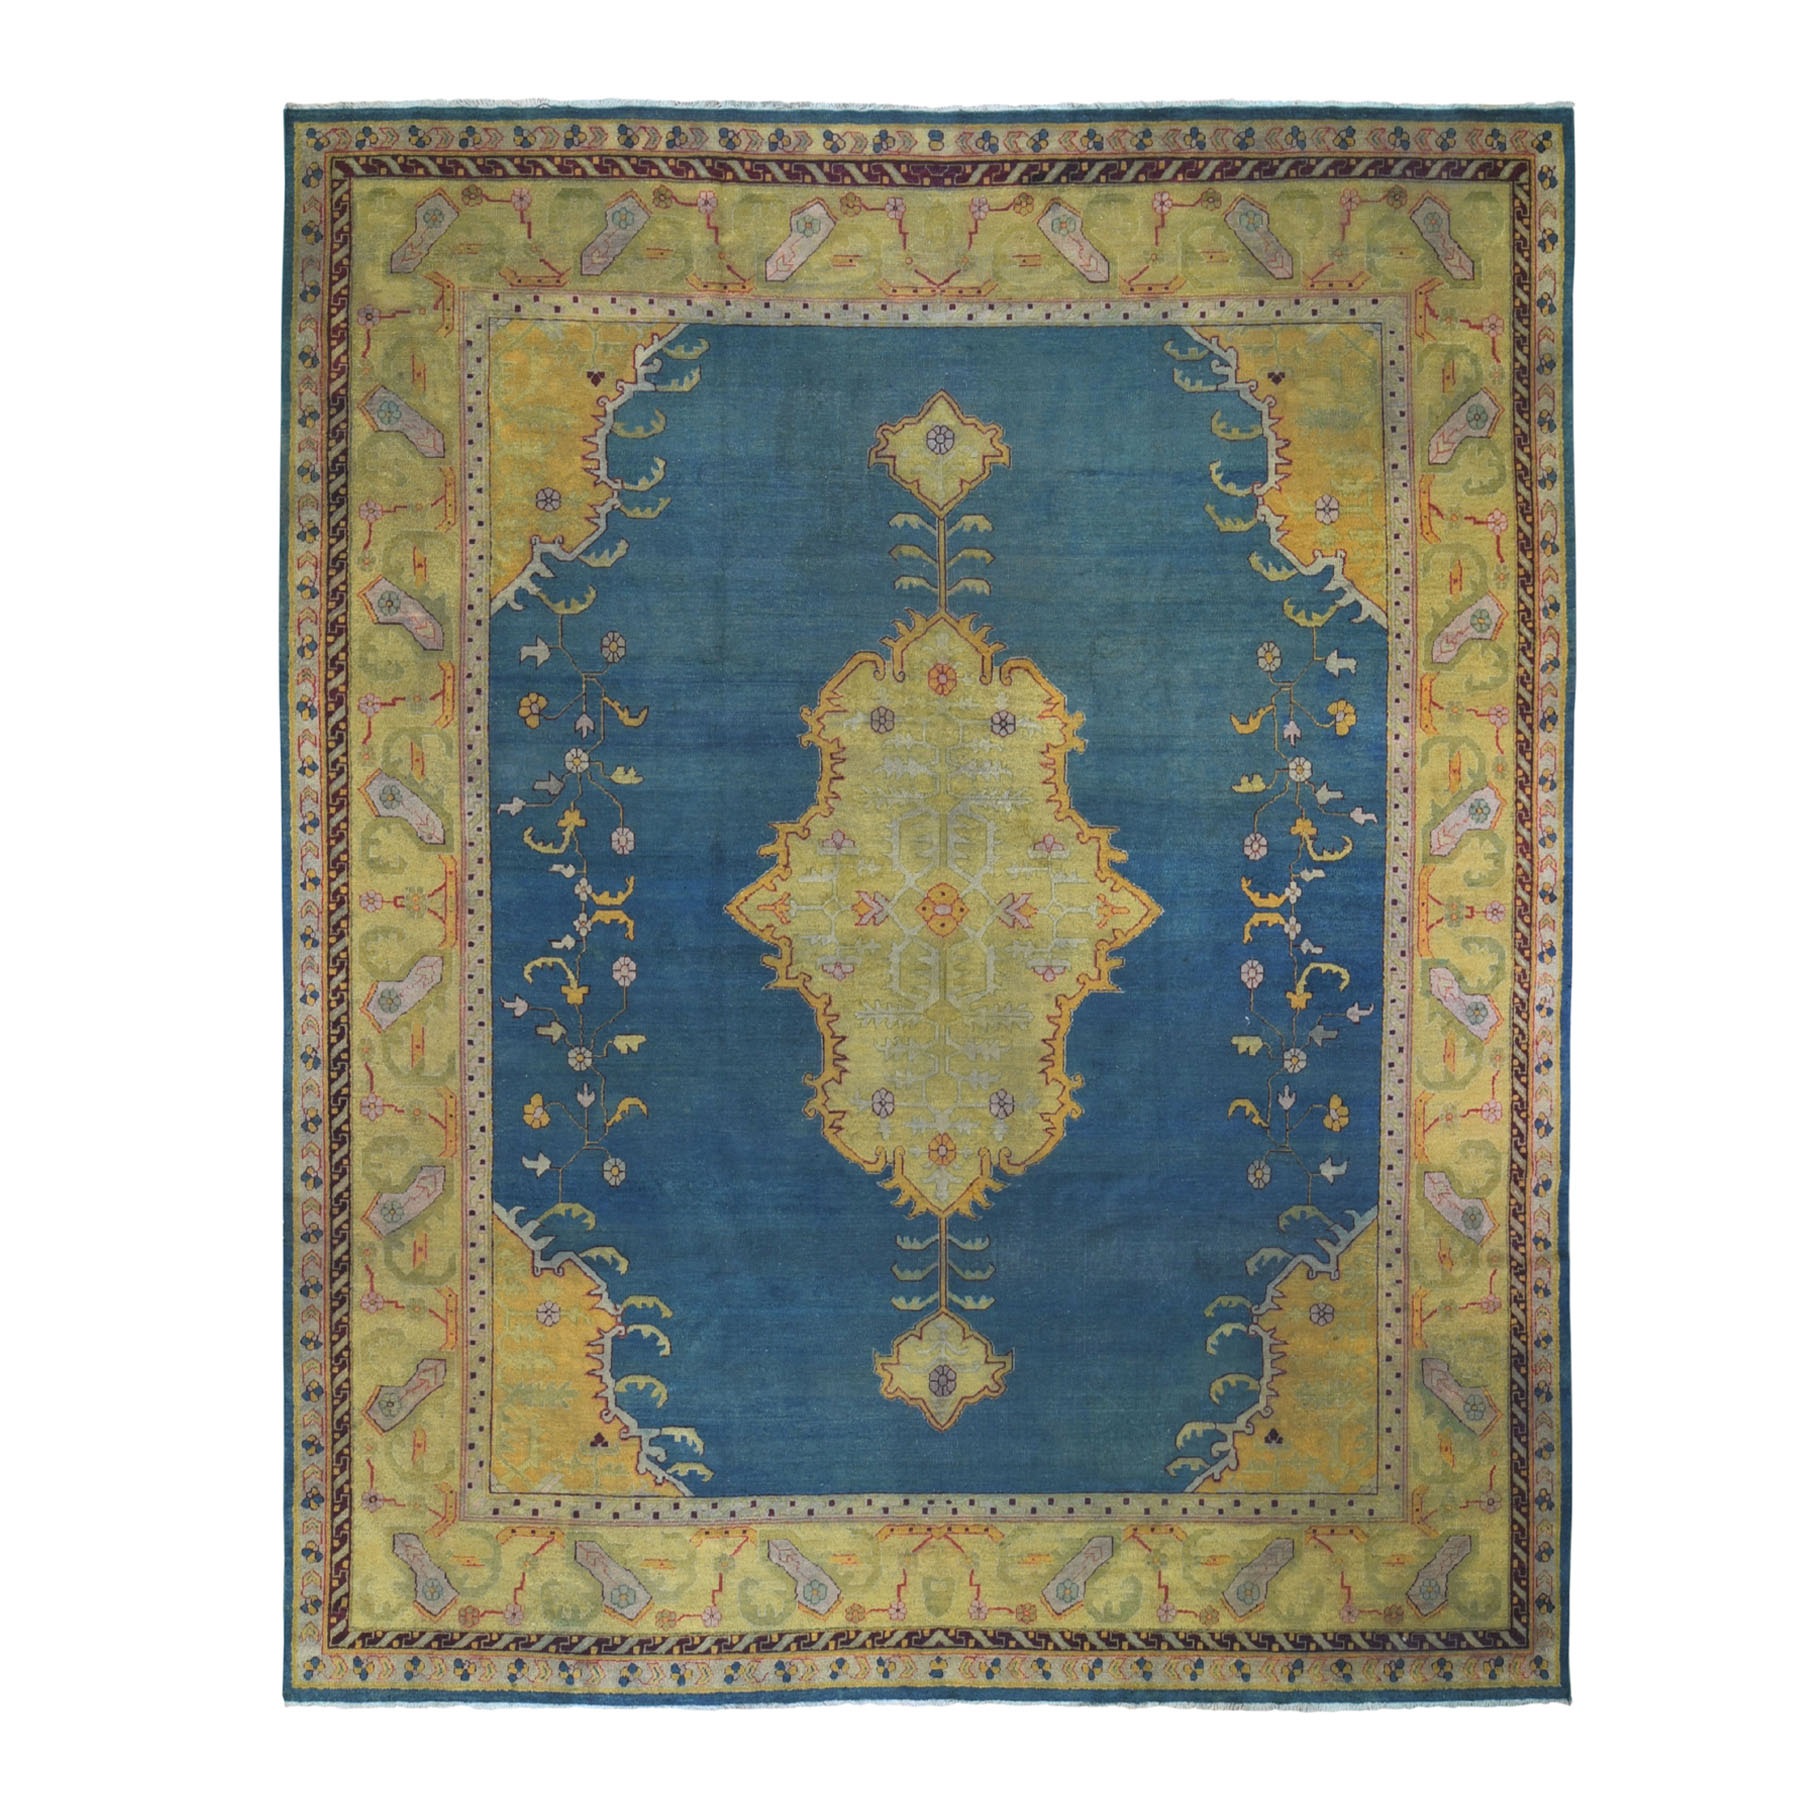 11'X12'6" Teal Antique Agra With Medallion Open Field Clean Good Cond Hand Knotted Oriental Rug moad96d7